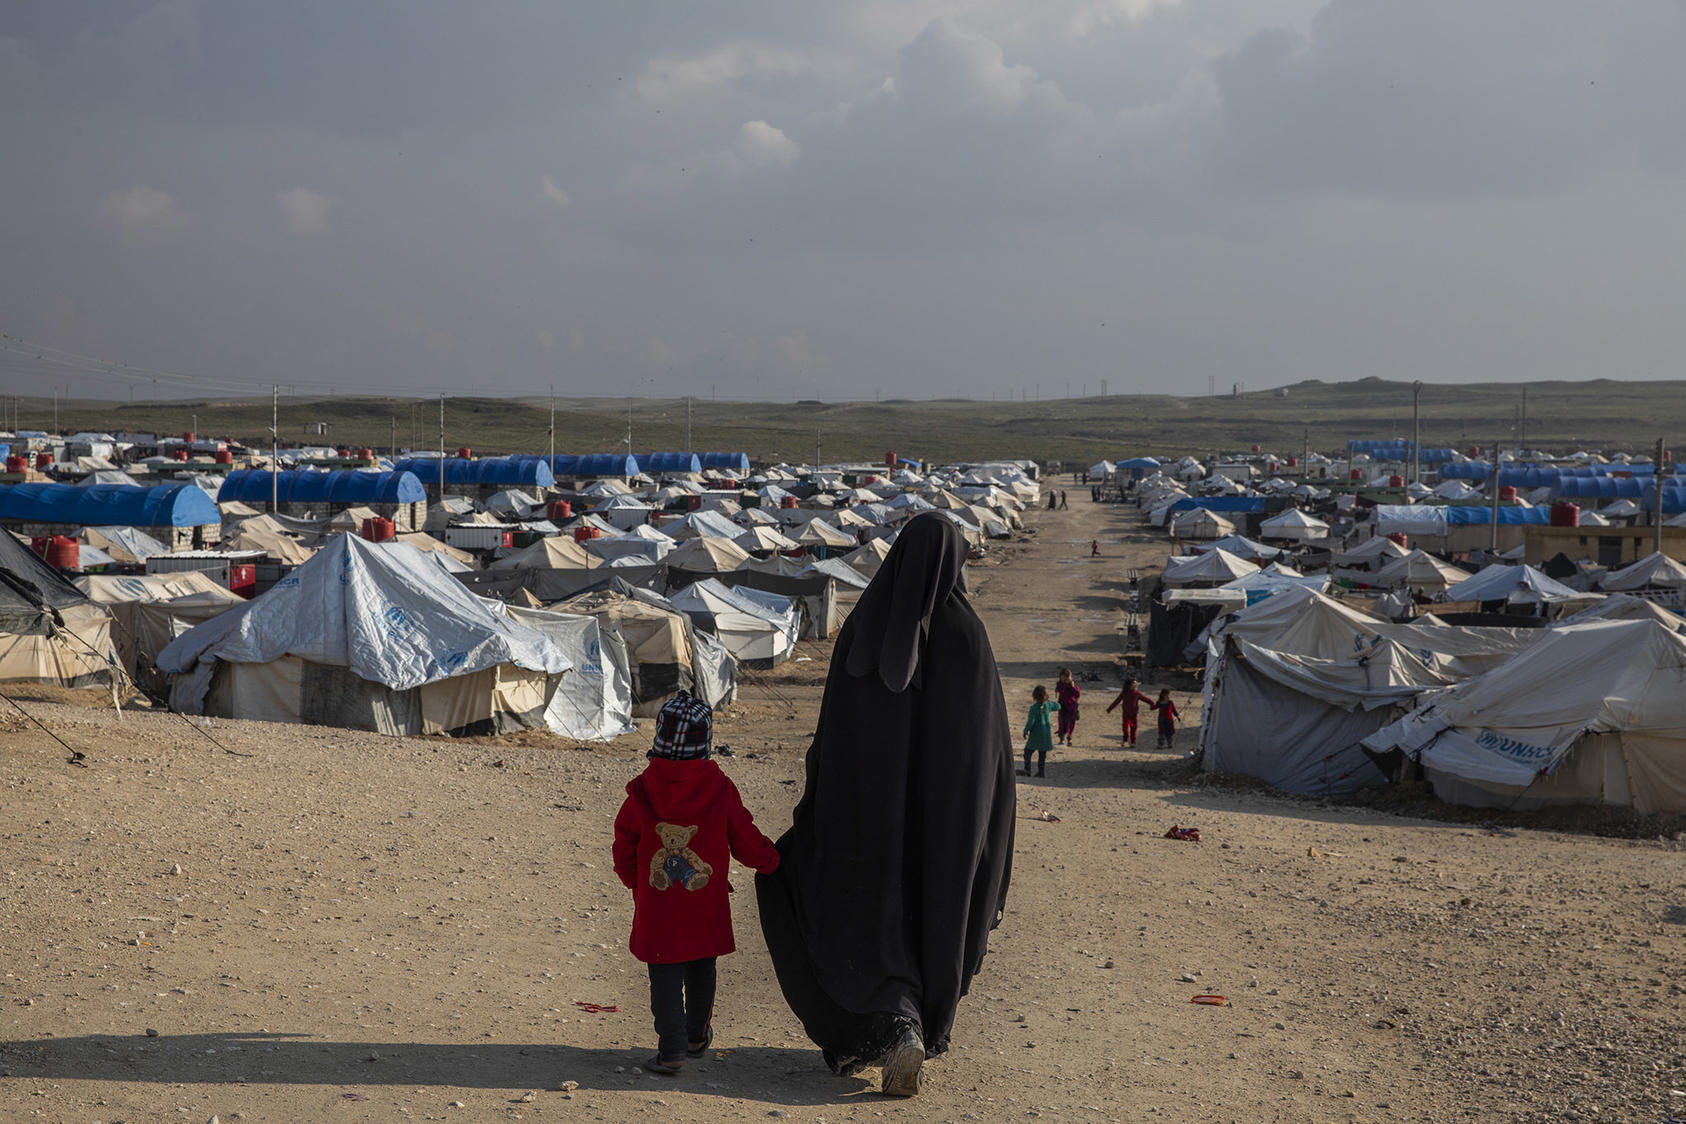 The al-Hol refugee camp in Syria, where many who have fled areas that were under control of the Islamic State group are now kept, Feb. 17, 2019. (Ivor Prickett/The New York Times)